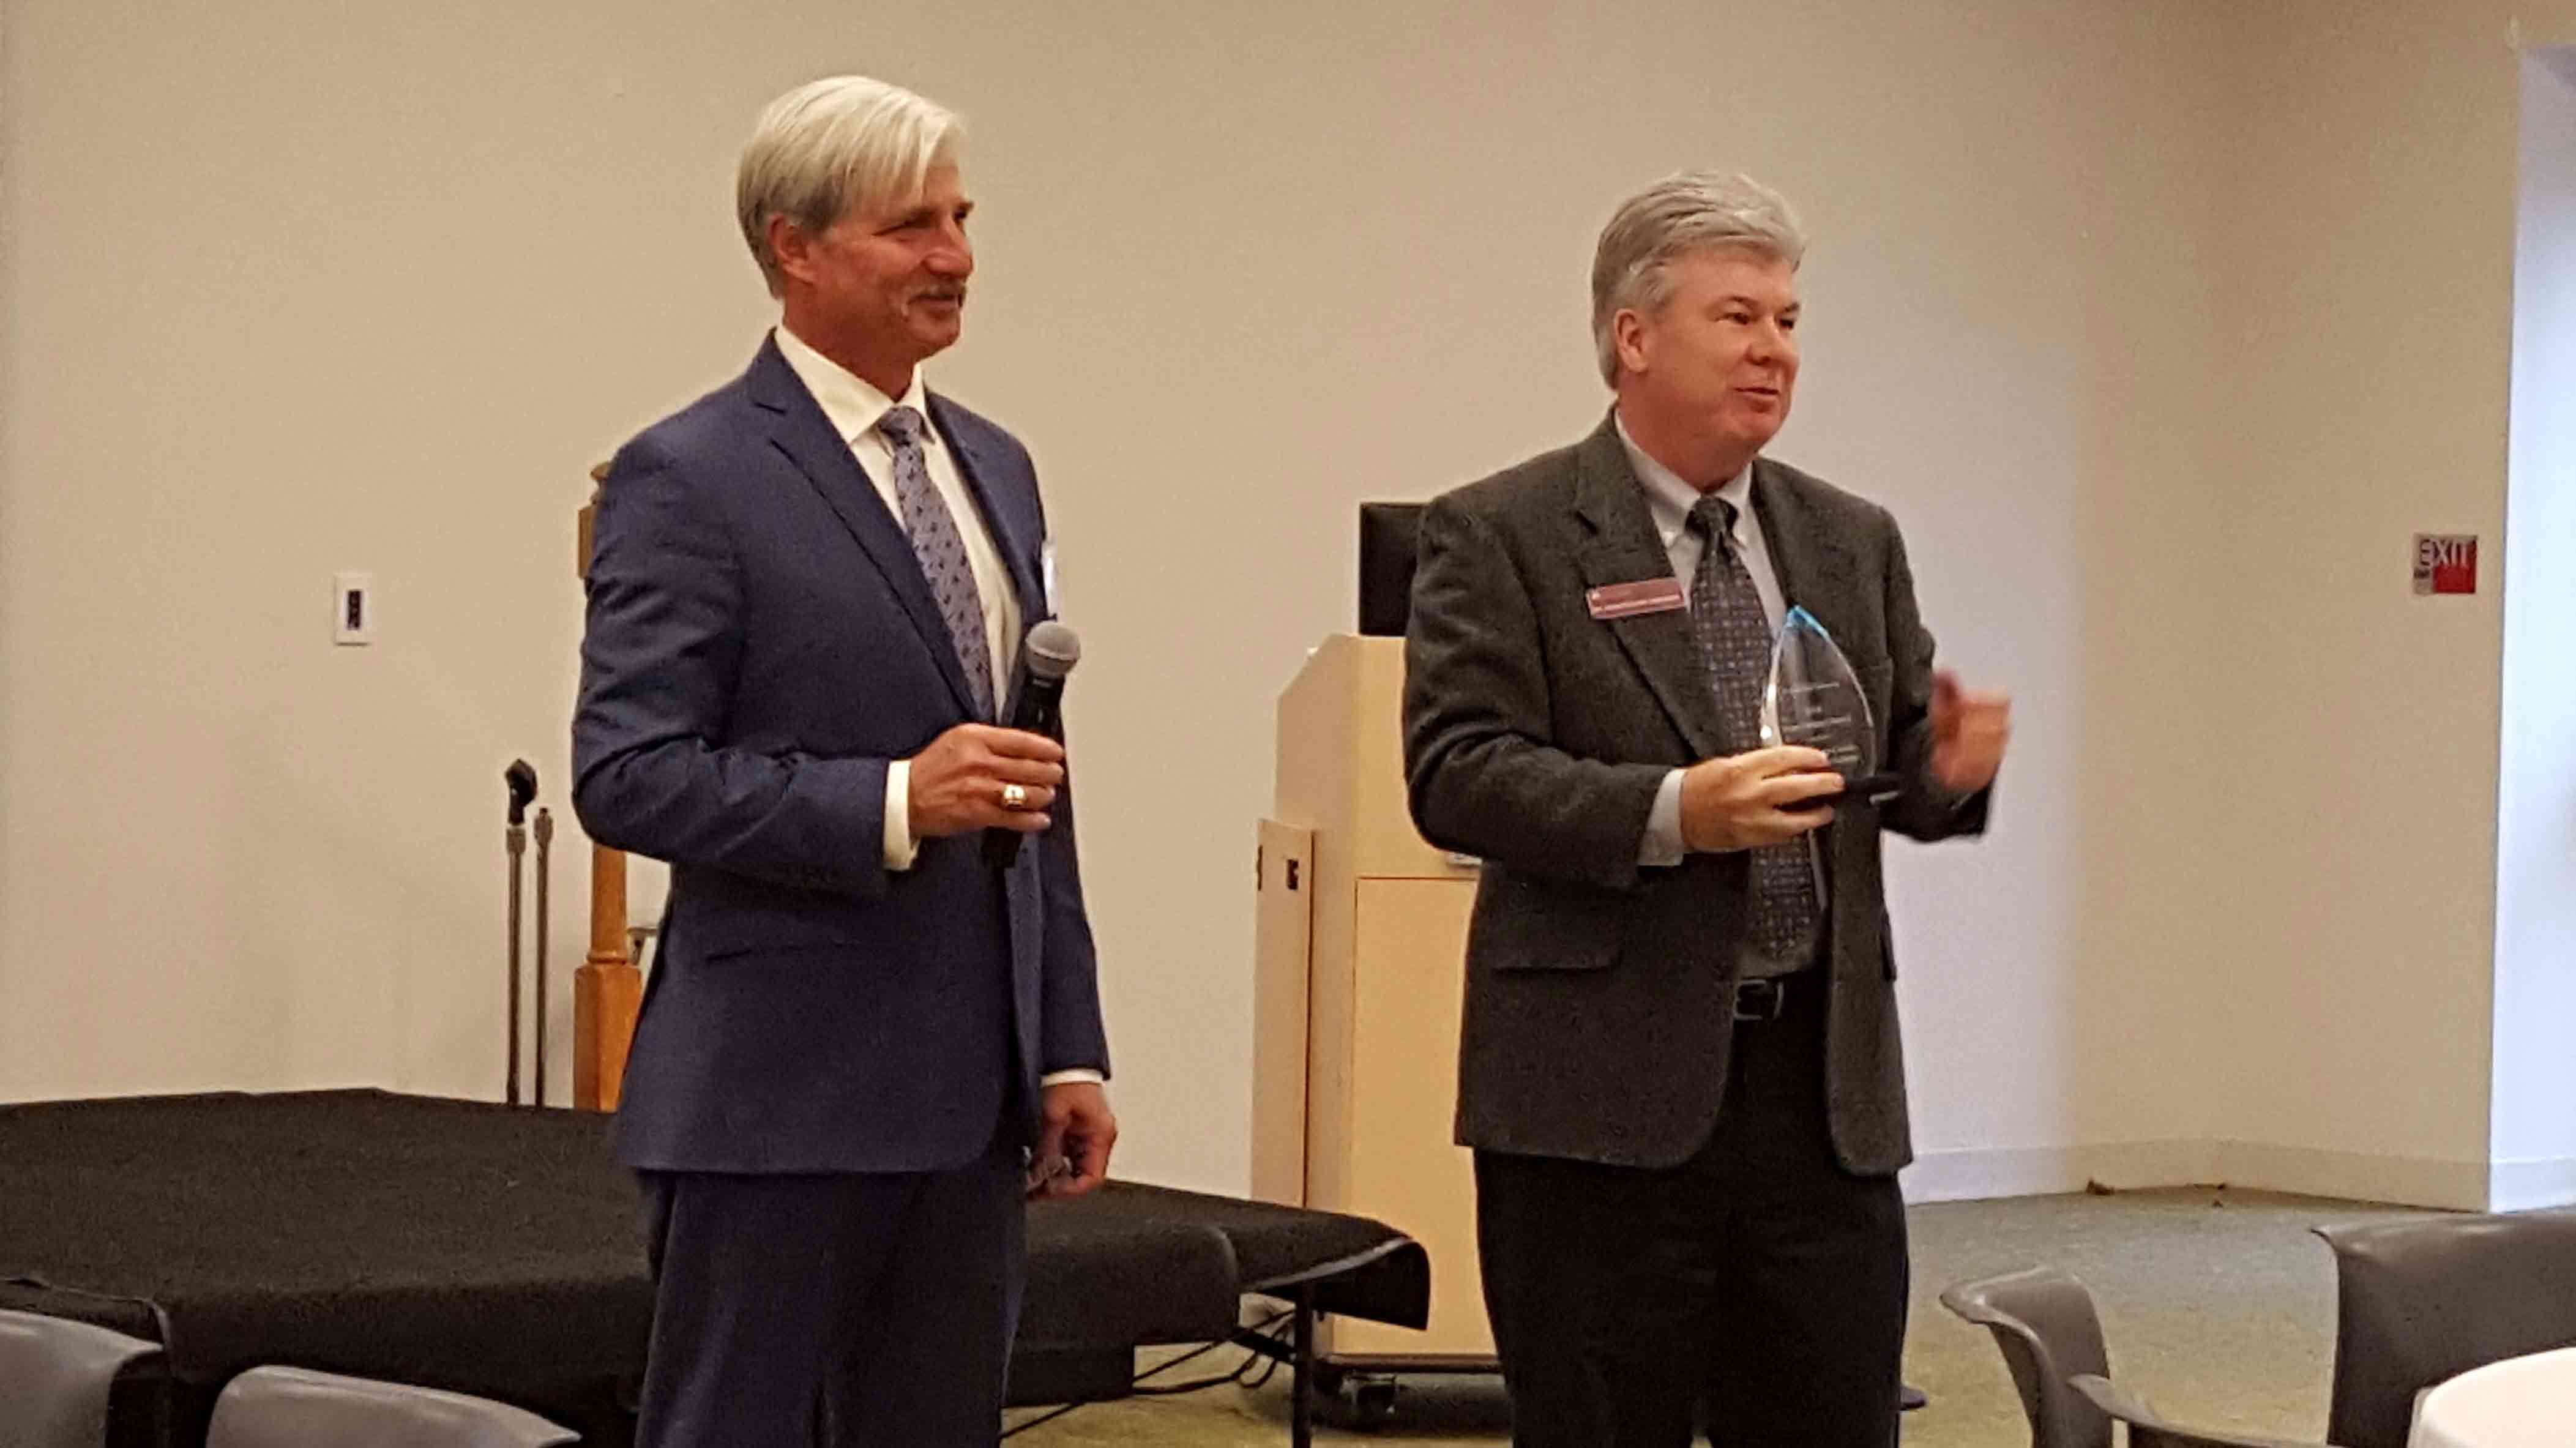 Montgomery County Development Corporation Chairperson Jerry Gorski (left) presents the 2018 Project Impact Award to Dr. Kevin Pollock, President of Montgomery County Community College.